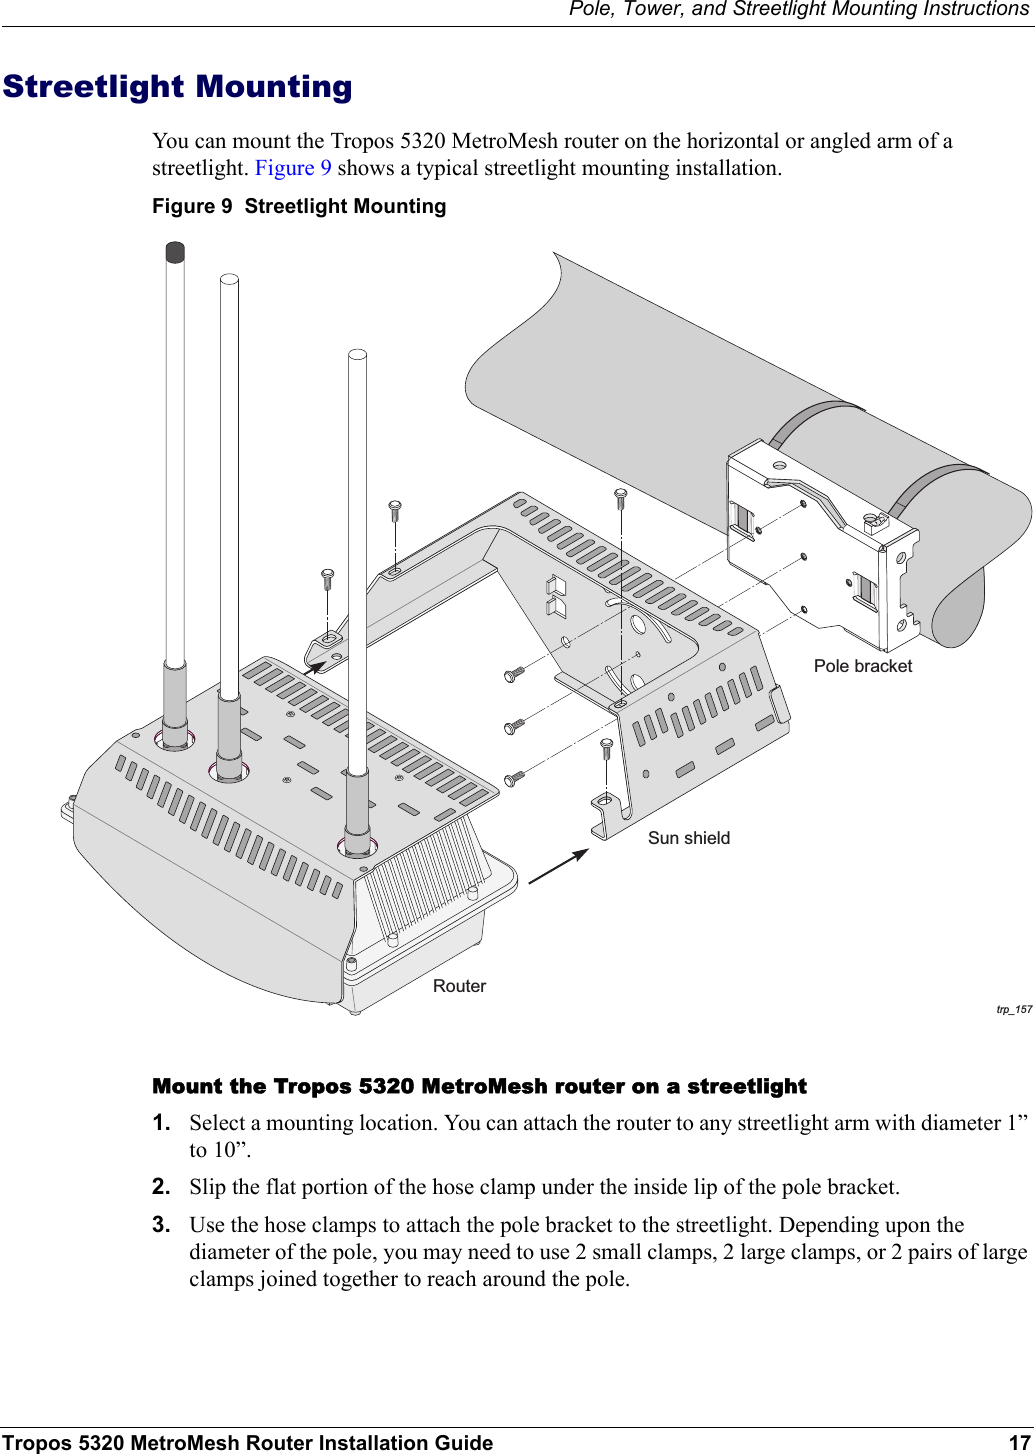 Pole, Tower, and Streetlight Mounting InstructionsTropos 5320 MetroMesh Router Installation Guide 17Streetlight MountingYou can mount the Tropos 5320 MetroMesh router on the horizontal or angled arm of a streetlight. Figure 9 shows a typical streetlight mounting installation.Figure 9  Streetlight MountingMount the Tropos 5320 MetroMesh router on a streetlight1. Select a mounting location. You can attach the router to any streetlight arm with diameter 1” to 10”. 2. Slip the flat portion of the hose clamp under the inside lip of the pole bracket. 3. Use the hose clamps to attach the pole bracket to the streetlight. Depending upon the diameter of the pole, you may need to use 2 small clamps, 2 large clamps, or 2 pairs of large clamps joined together to reach around the pole. trp_157Pole bracketRouterSun shield